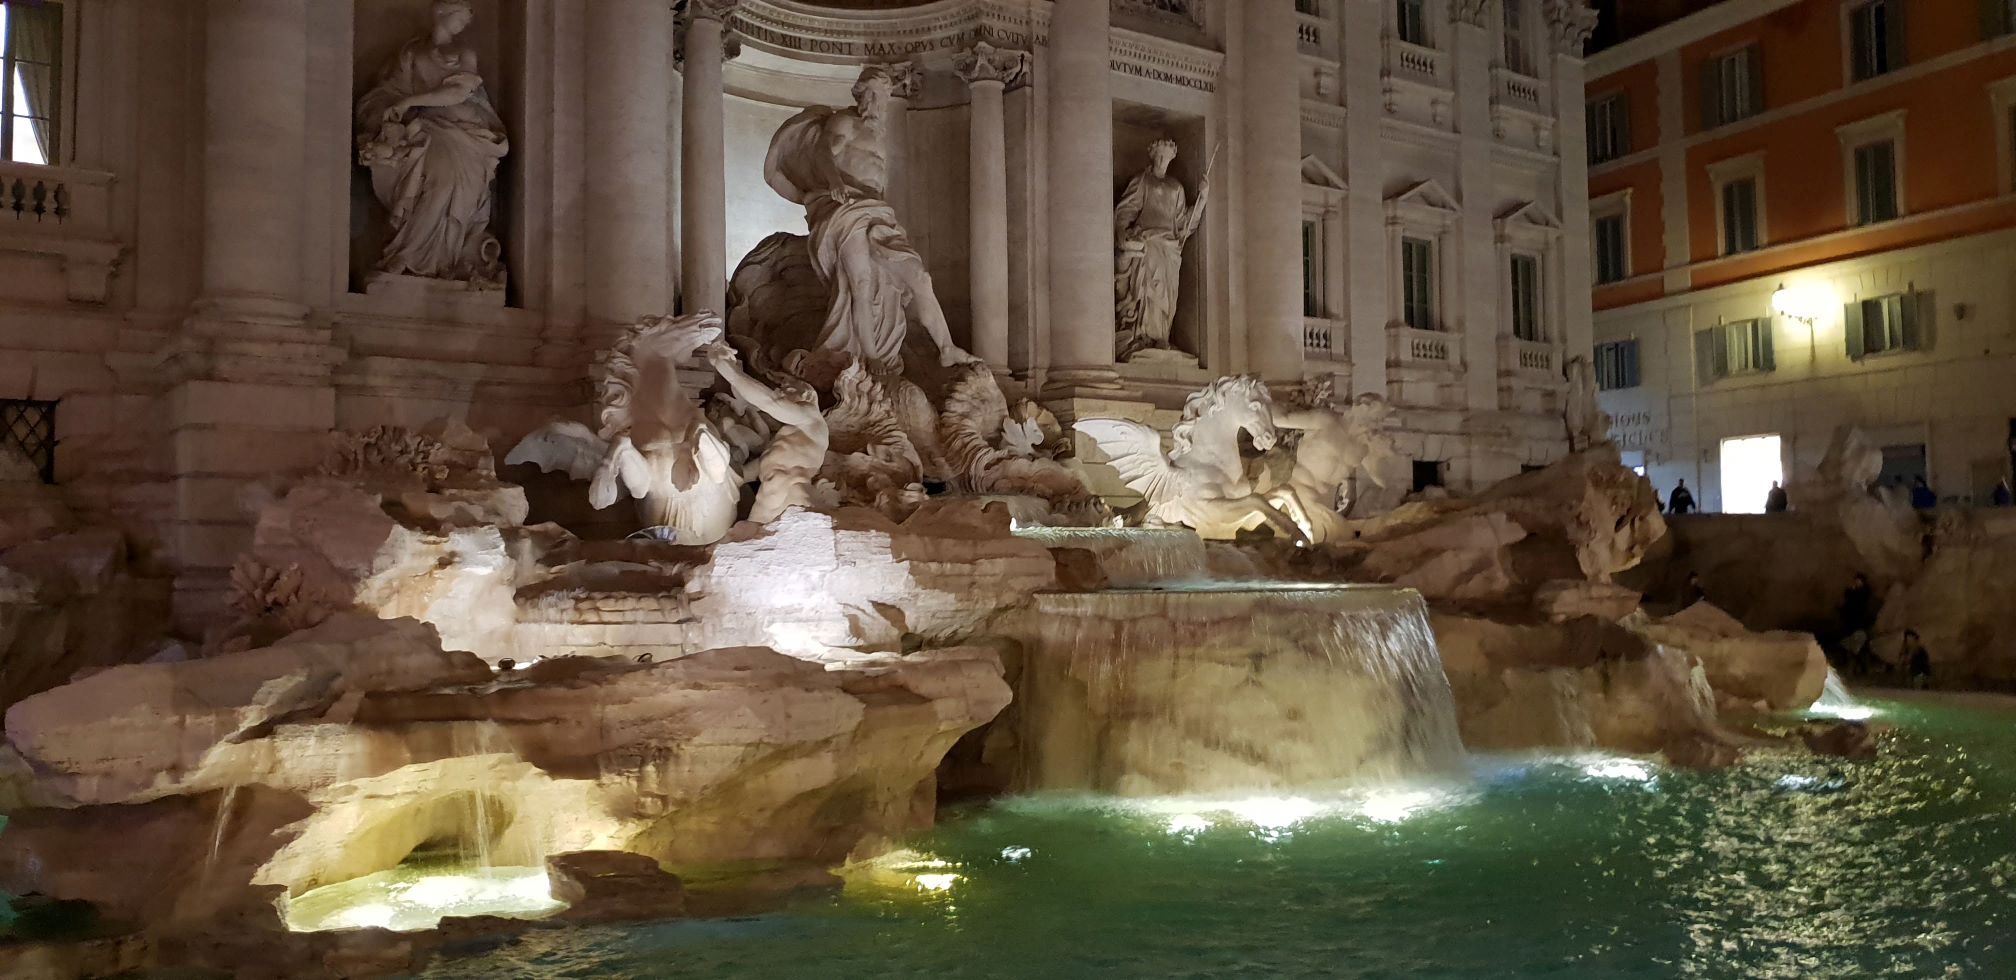 Top things to see in Rome